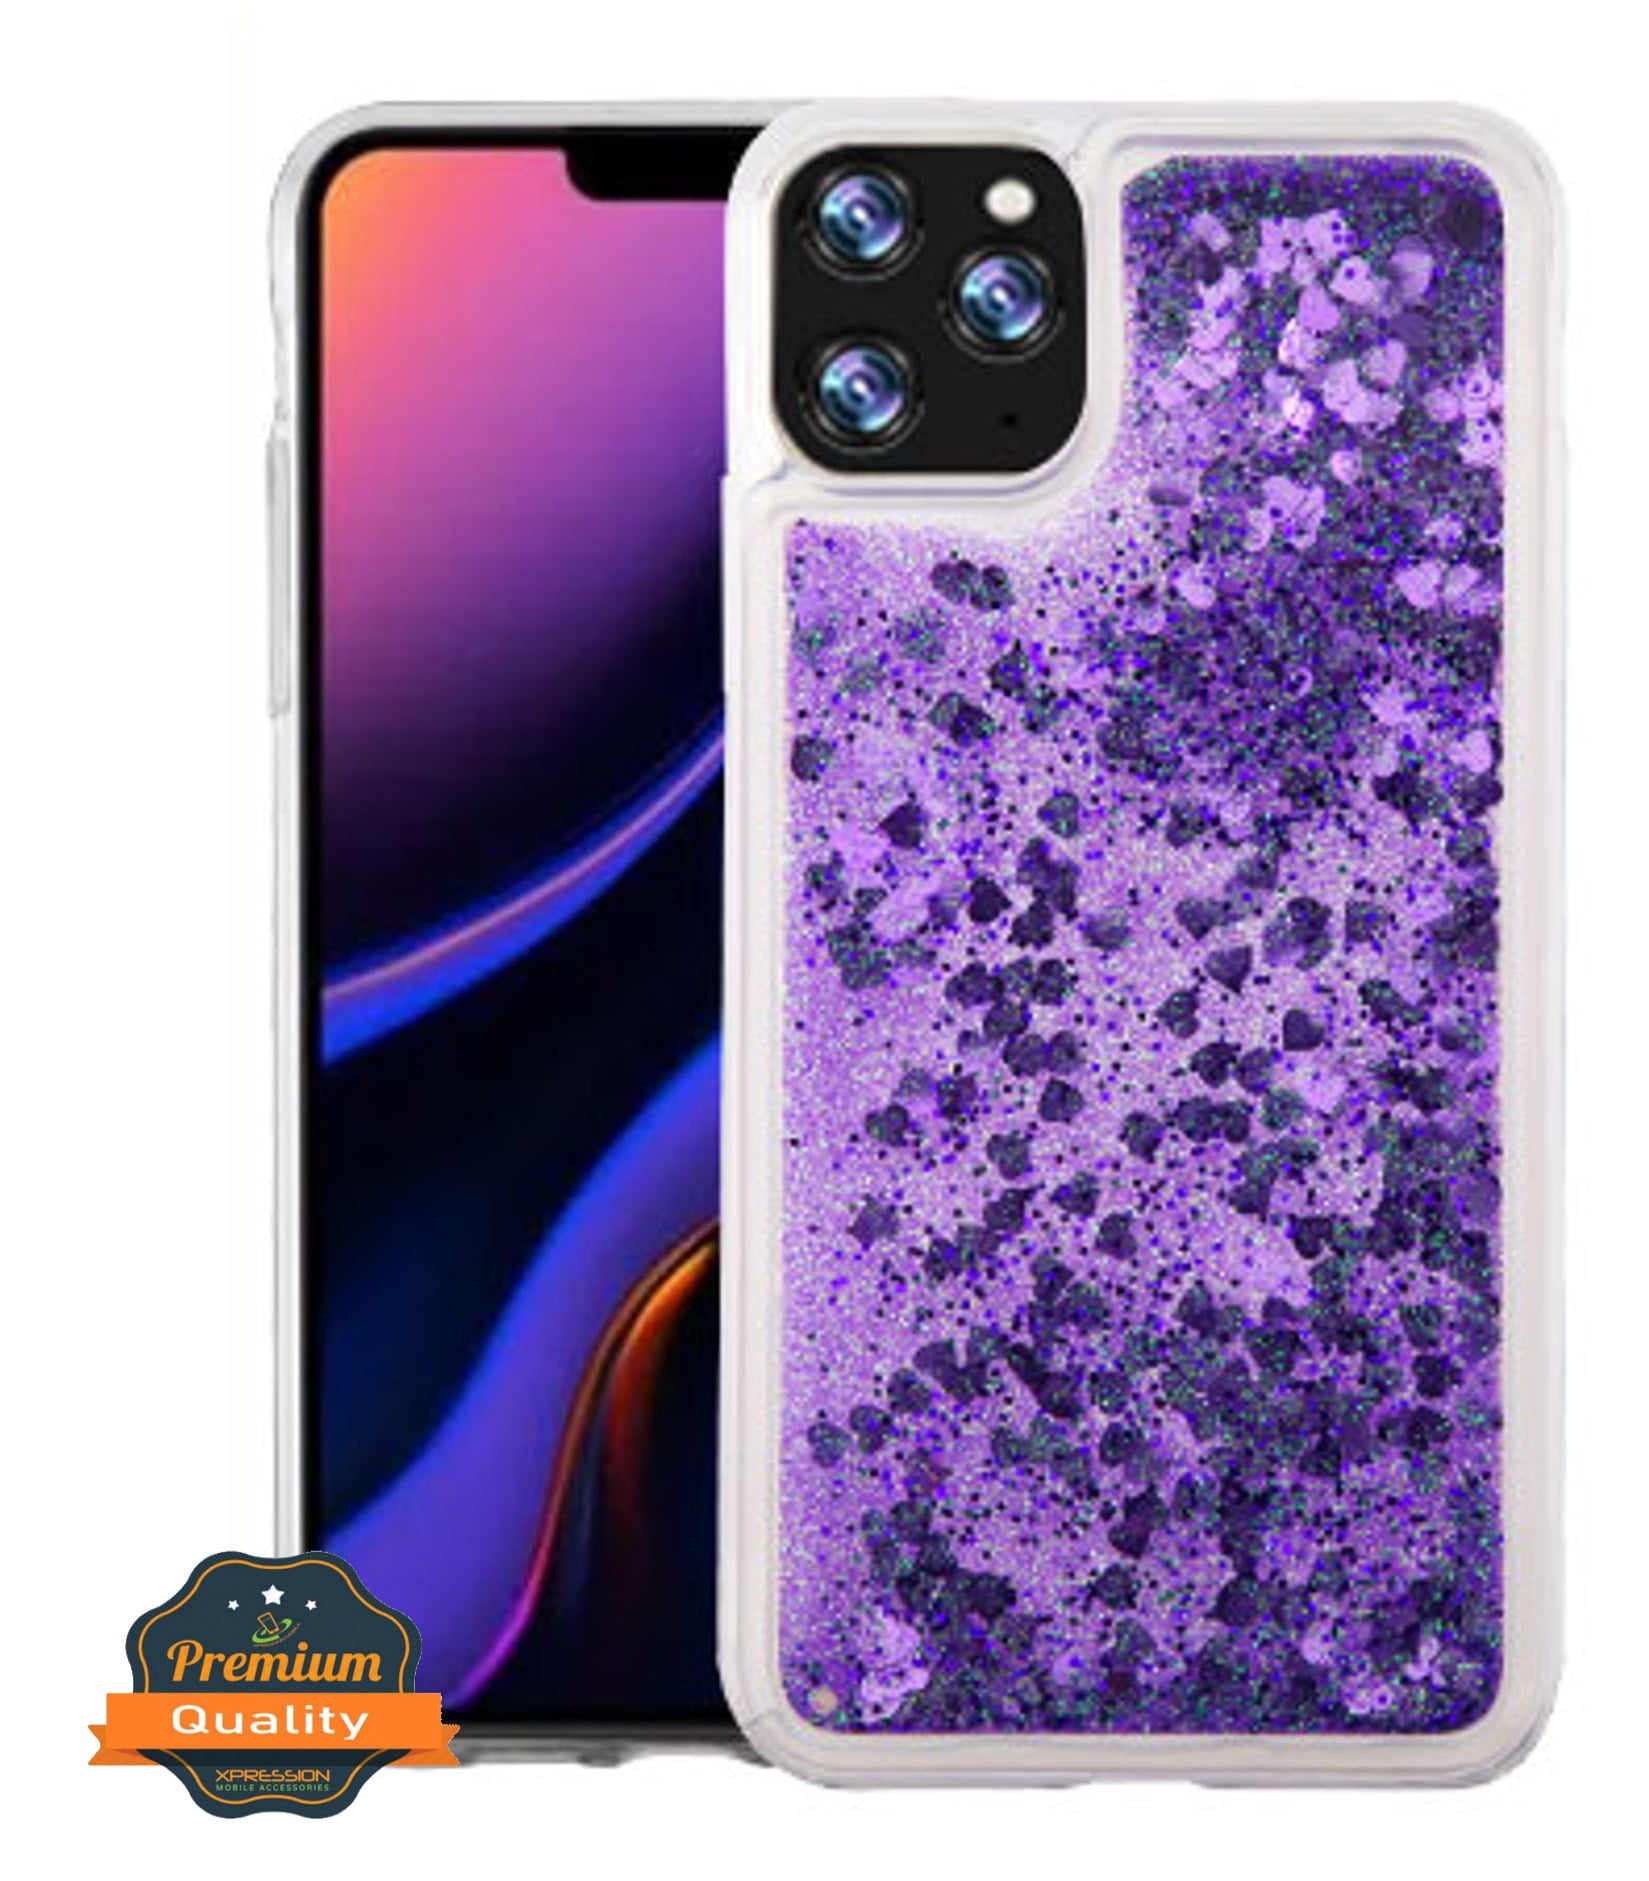 Red MRSTER iPhone 11 Pro Case Glitter Bling Bling TPU Case With 360 Rotating Ring Stand GS Bling TPU Shock-Absorption Protective Shell Skin Cases Covers for Apple iPhone 11 Pro 5.8